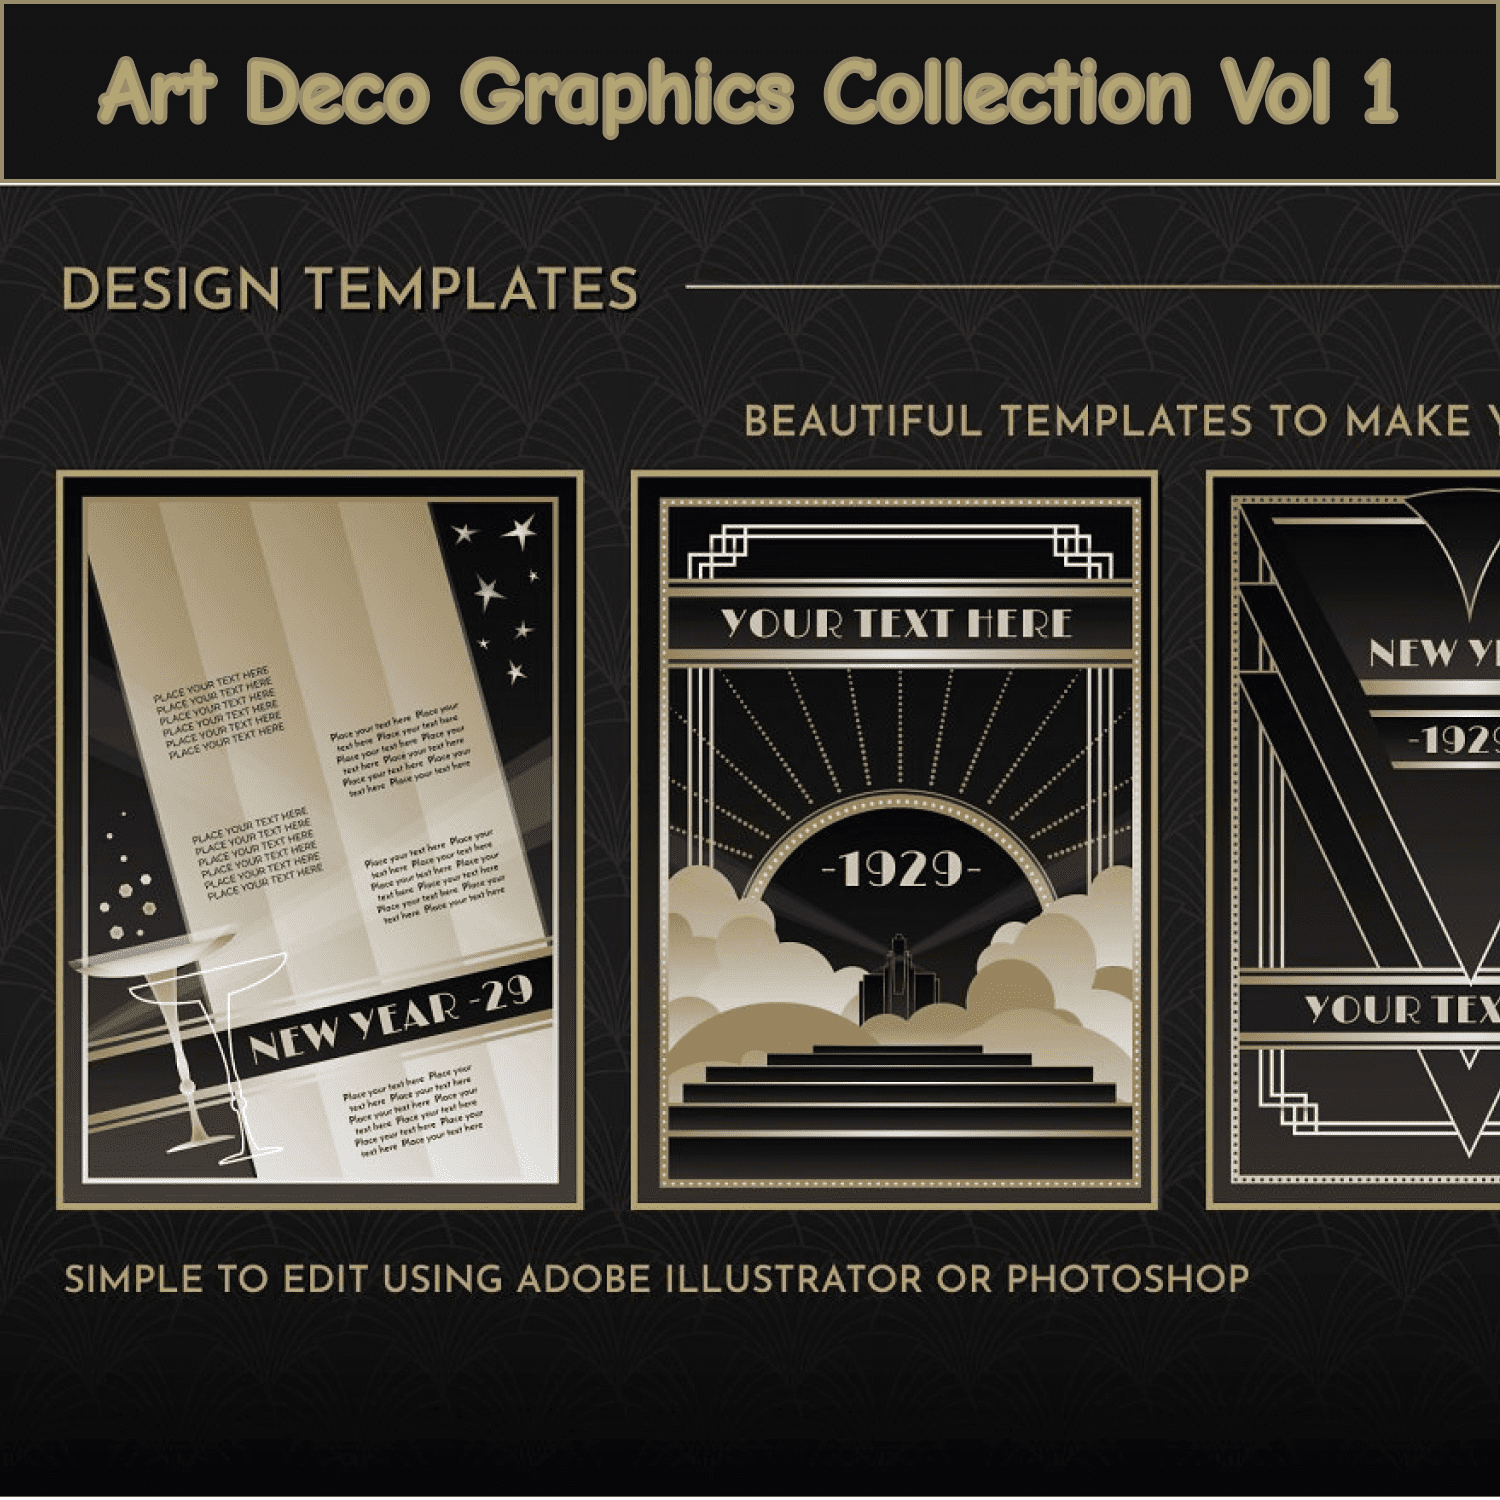 Art Deco Graphics Collection Vol 1 cover image.